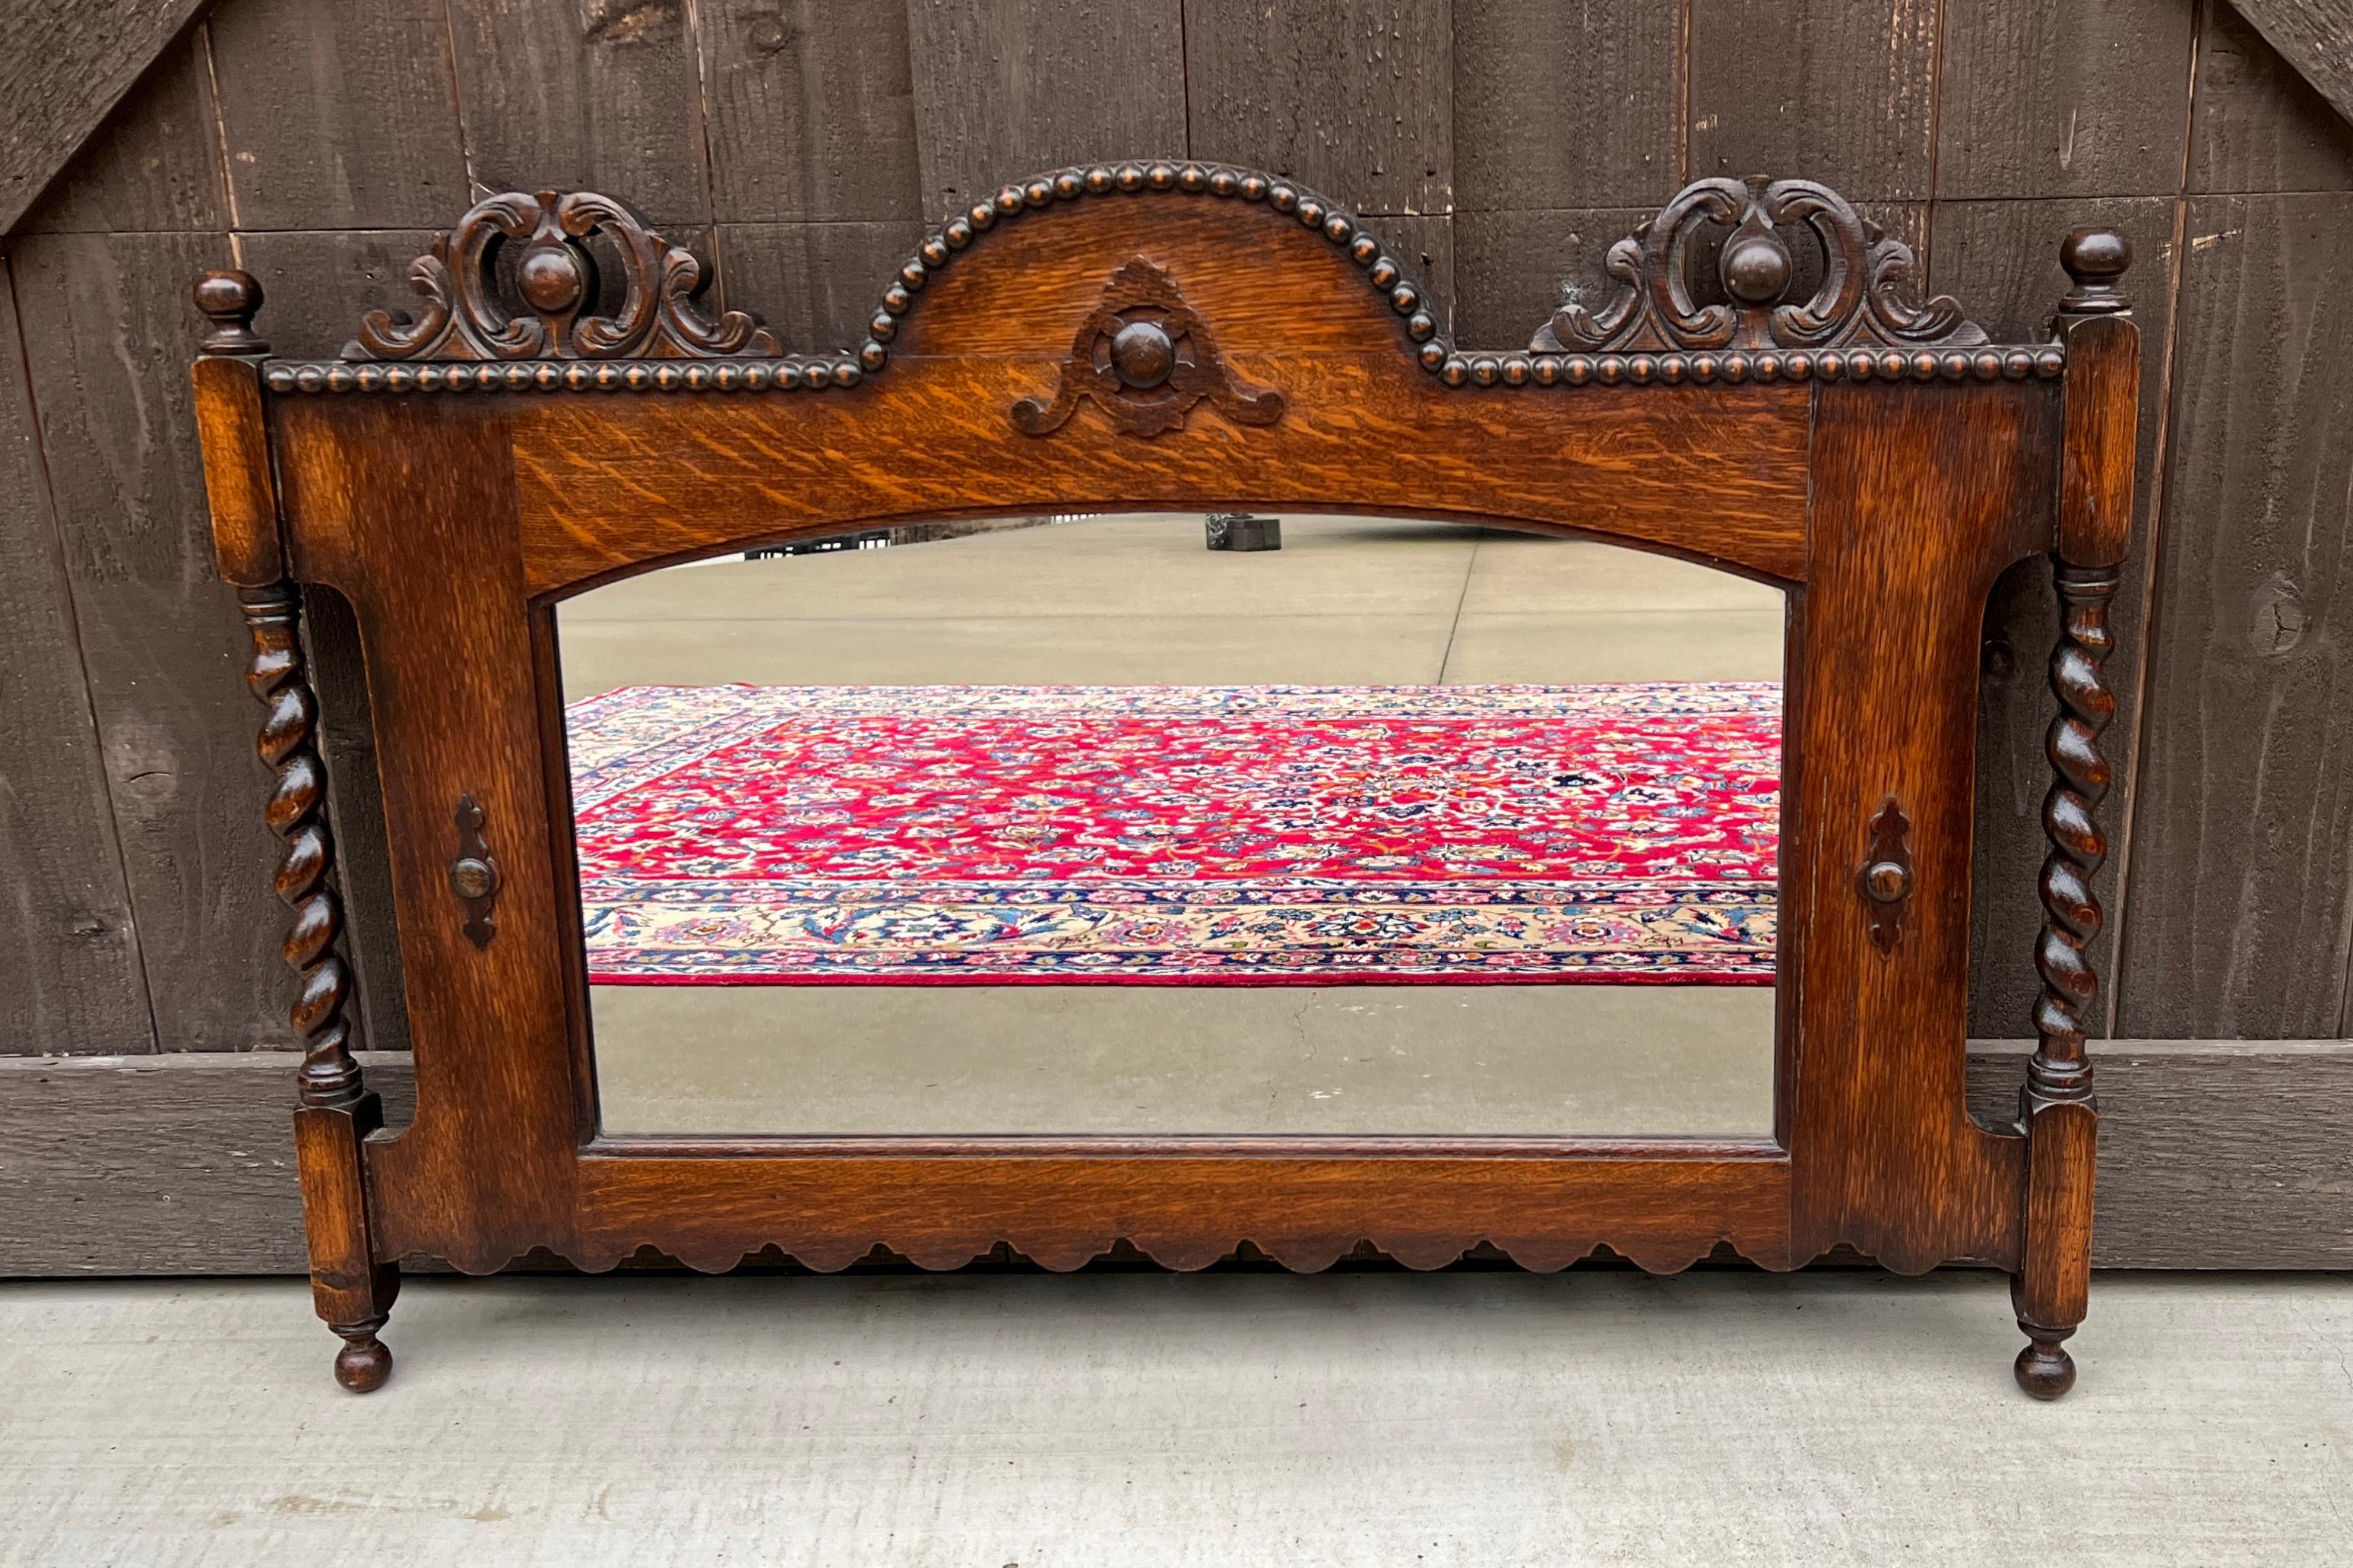 CHARMING Antique English Oak Jacobean Style Rectangular Framed Oak Mirror w/ Barley Twist Posts and Beaded Arched Top~~c. 1930s
 
Popular classic English hanging wall mirror~~beautifully carved with wood back~~perfect for a fireplace mantel, entry